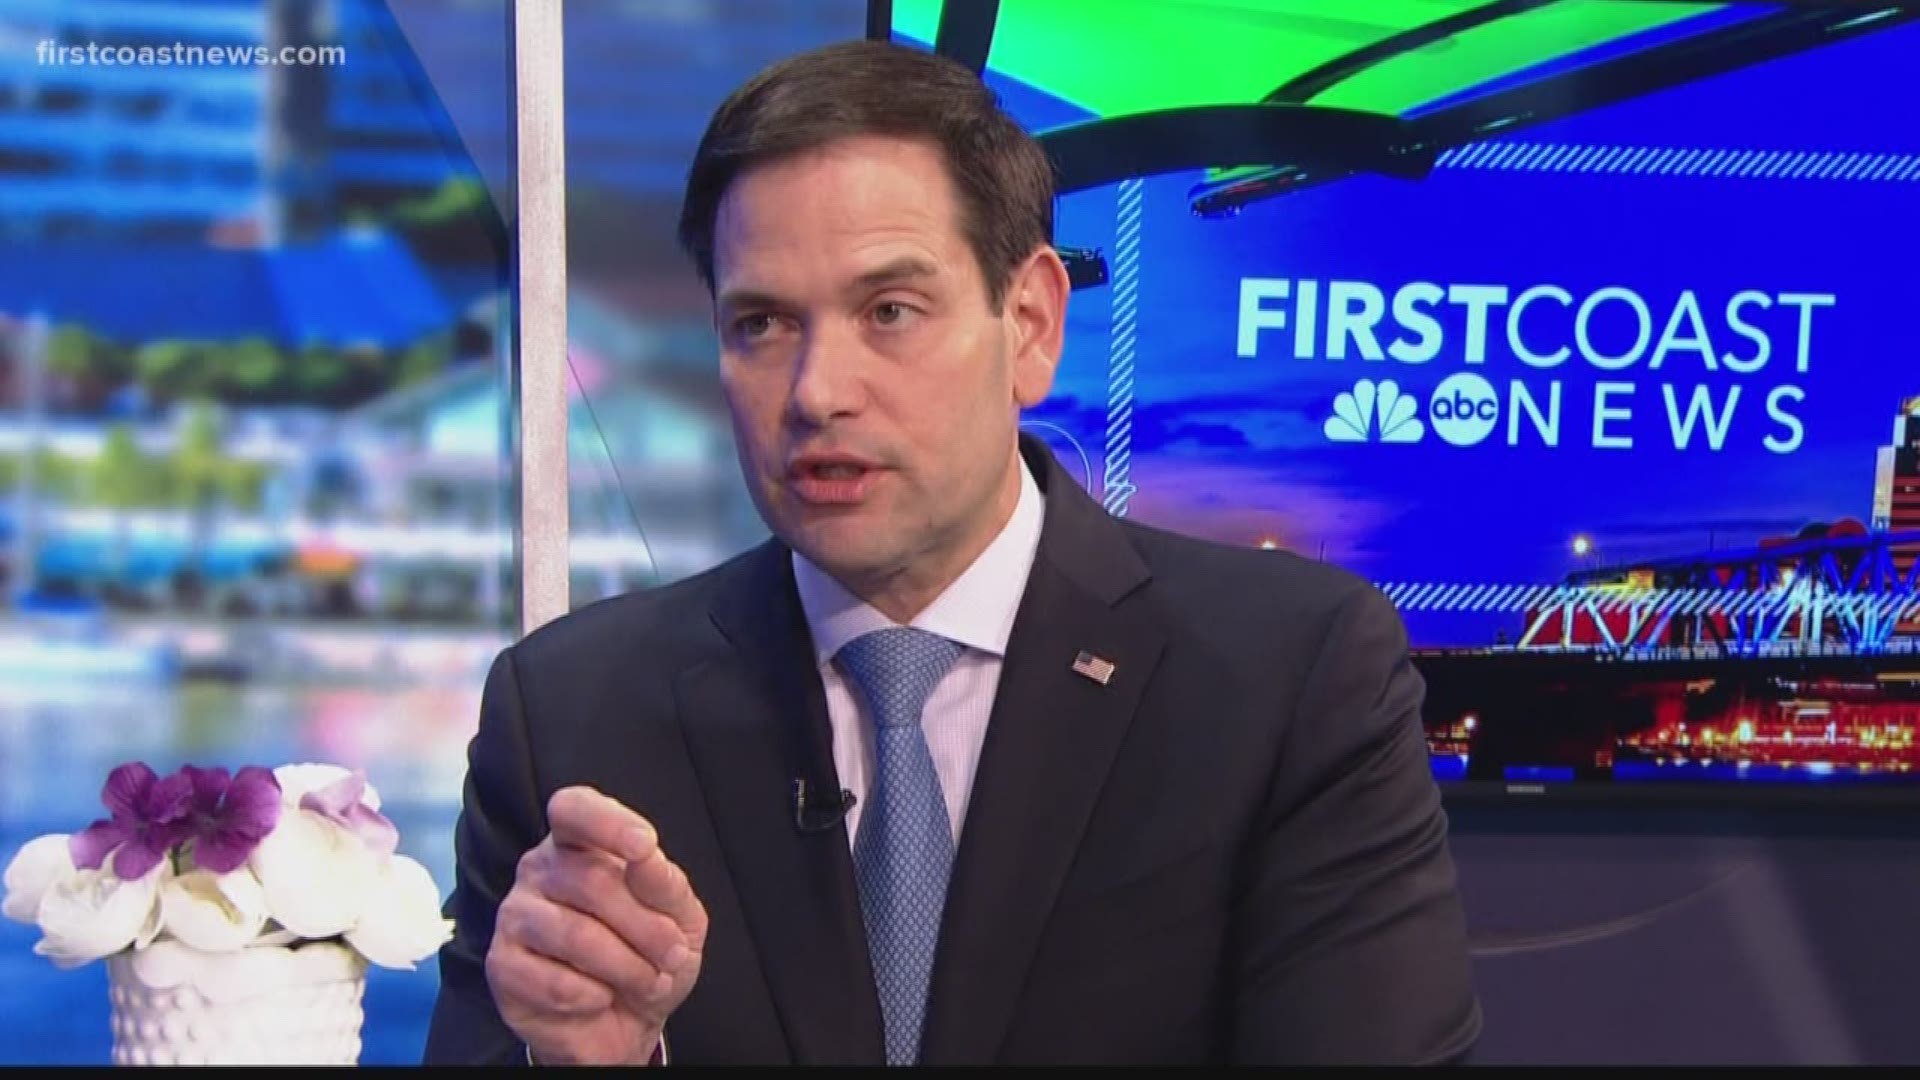 Senator Rubio believes there is a crisis at the border but does not think Trump should have declared a national emergency.